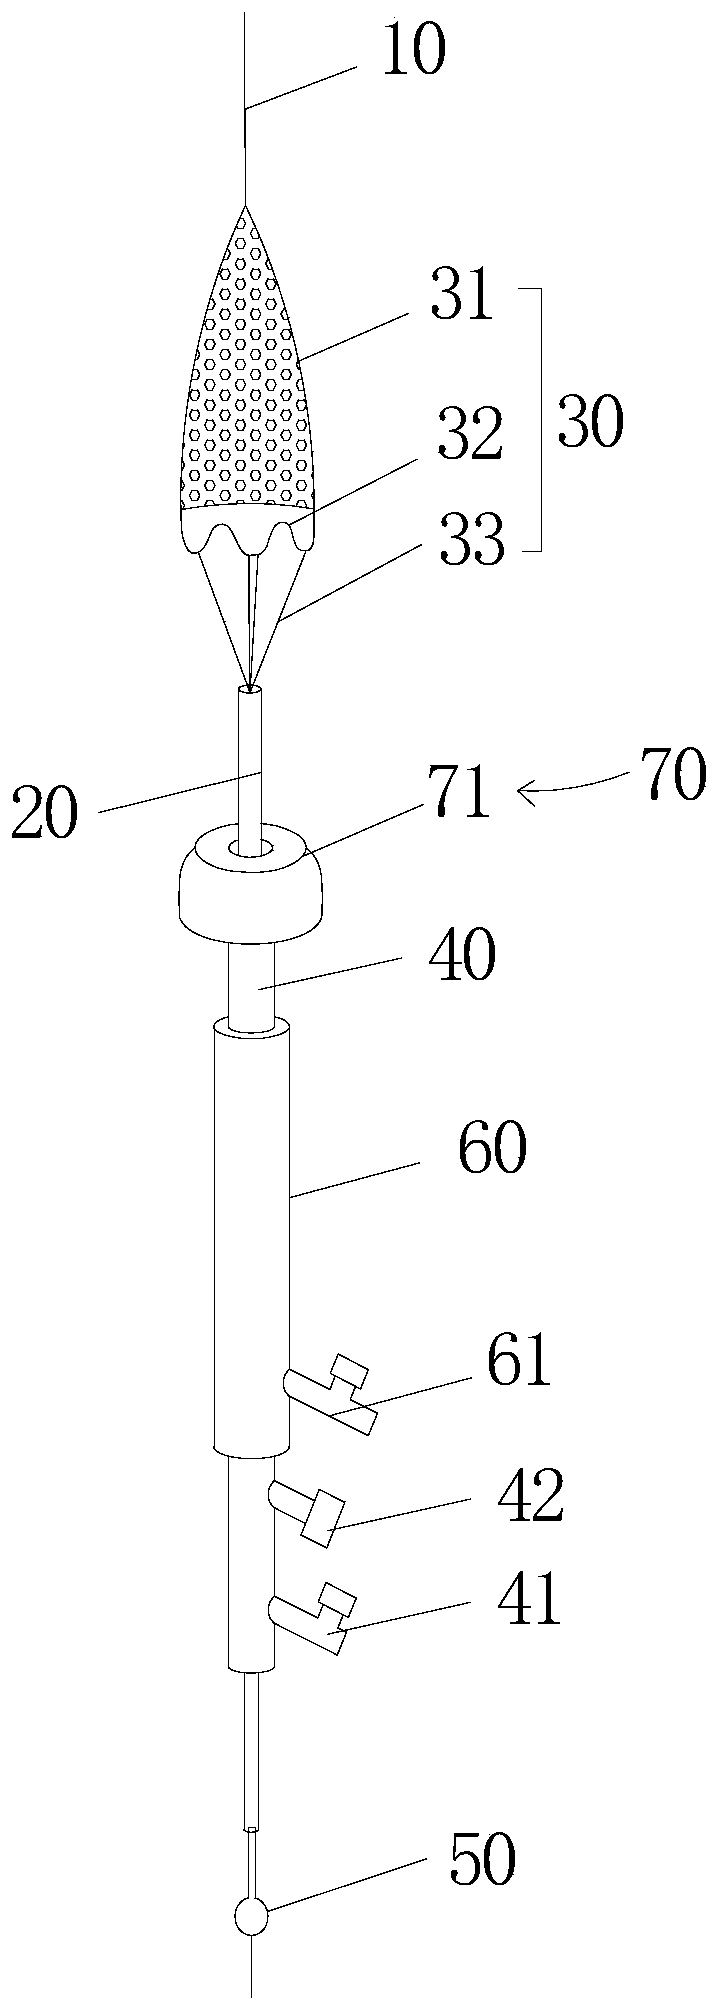 Thrombus taking device applied to artery and venous thrombus